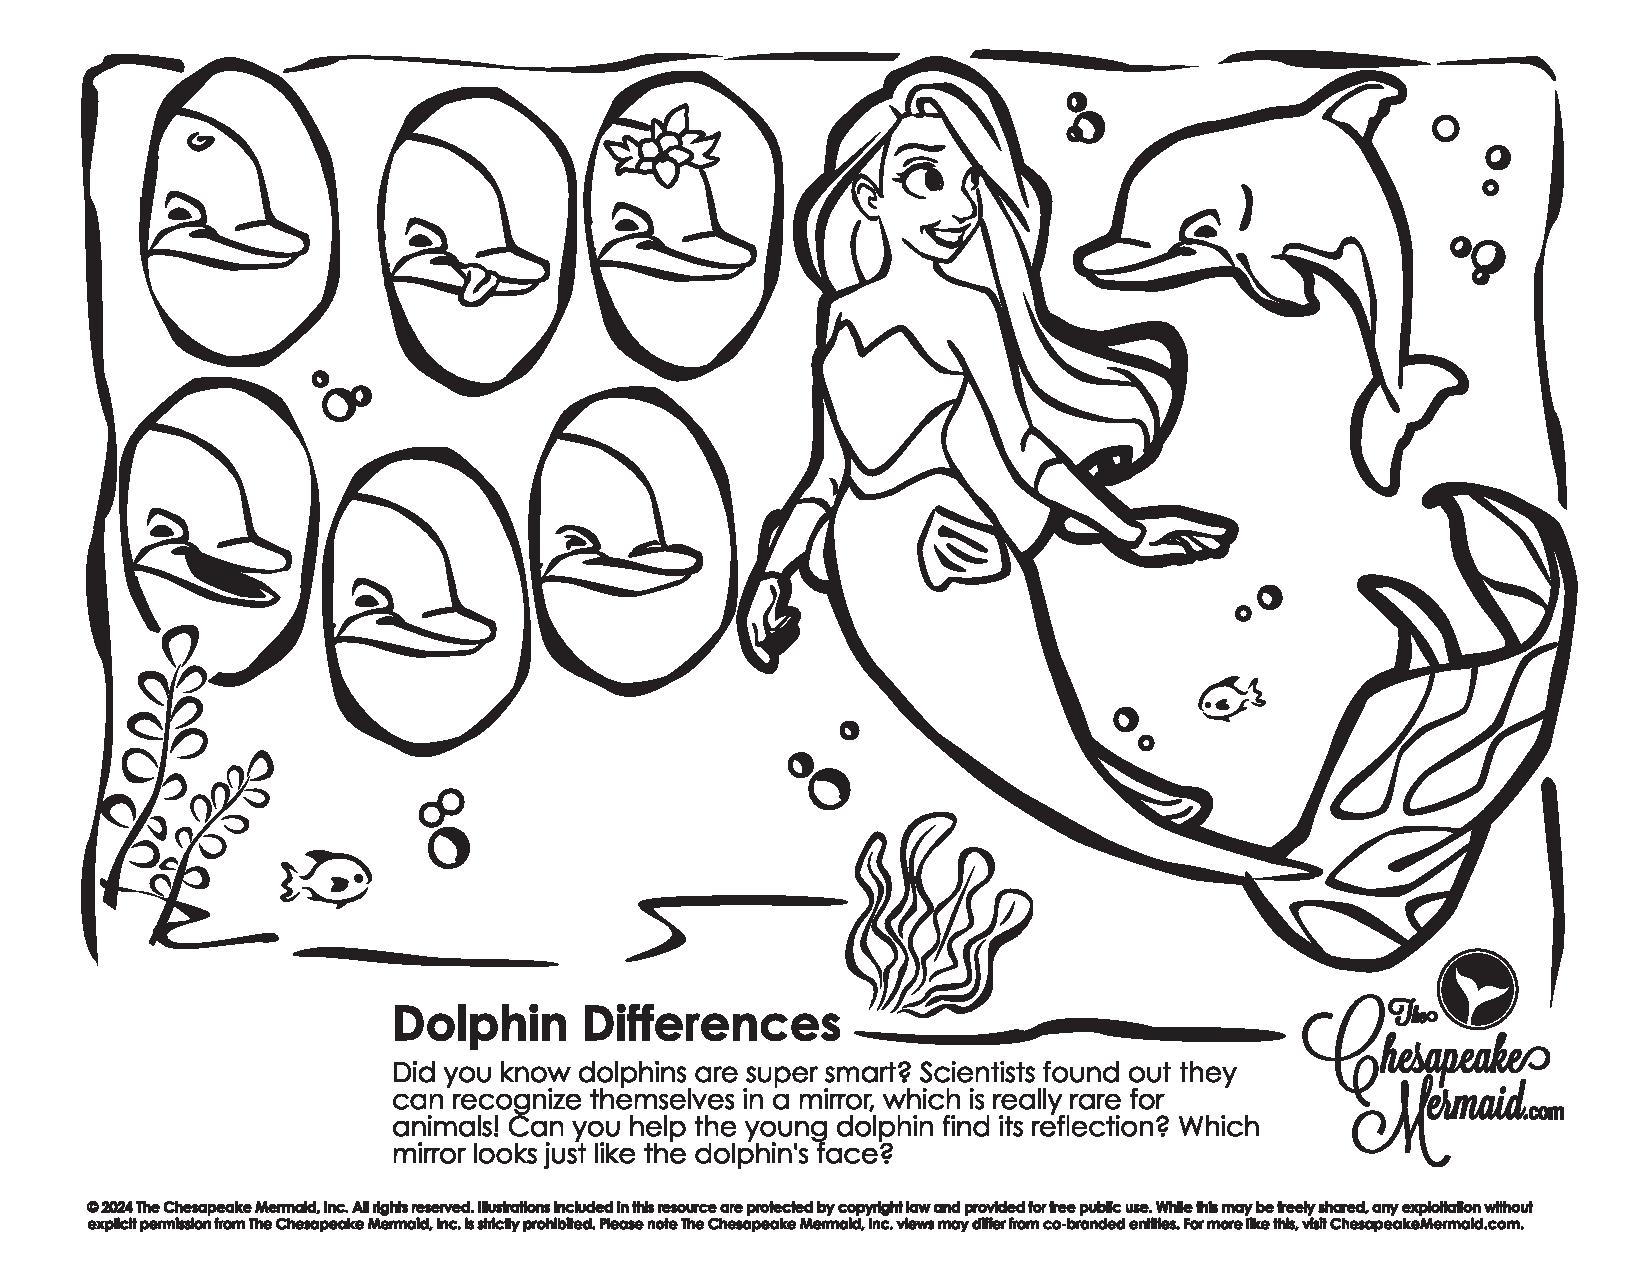 Dolphin Differences!